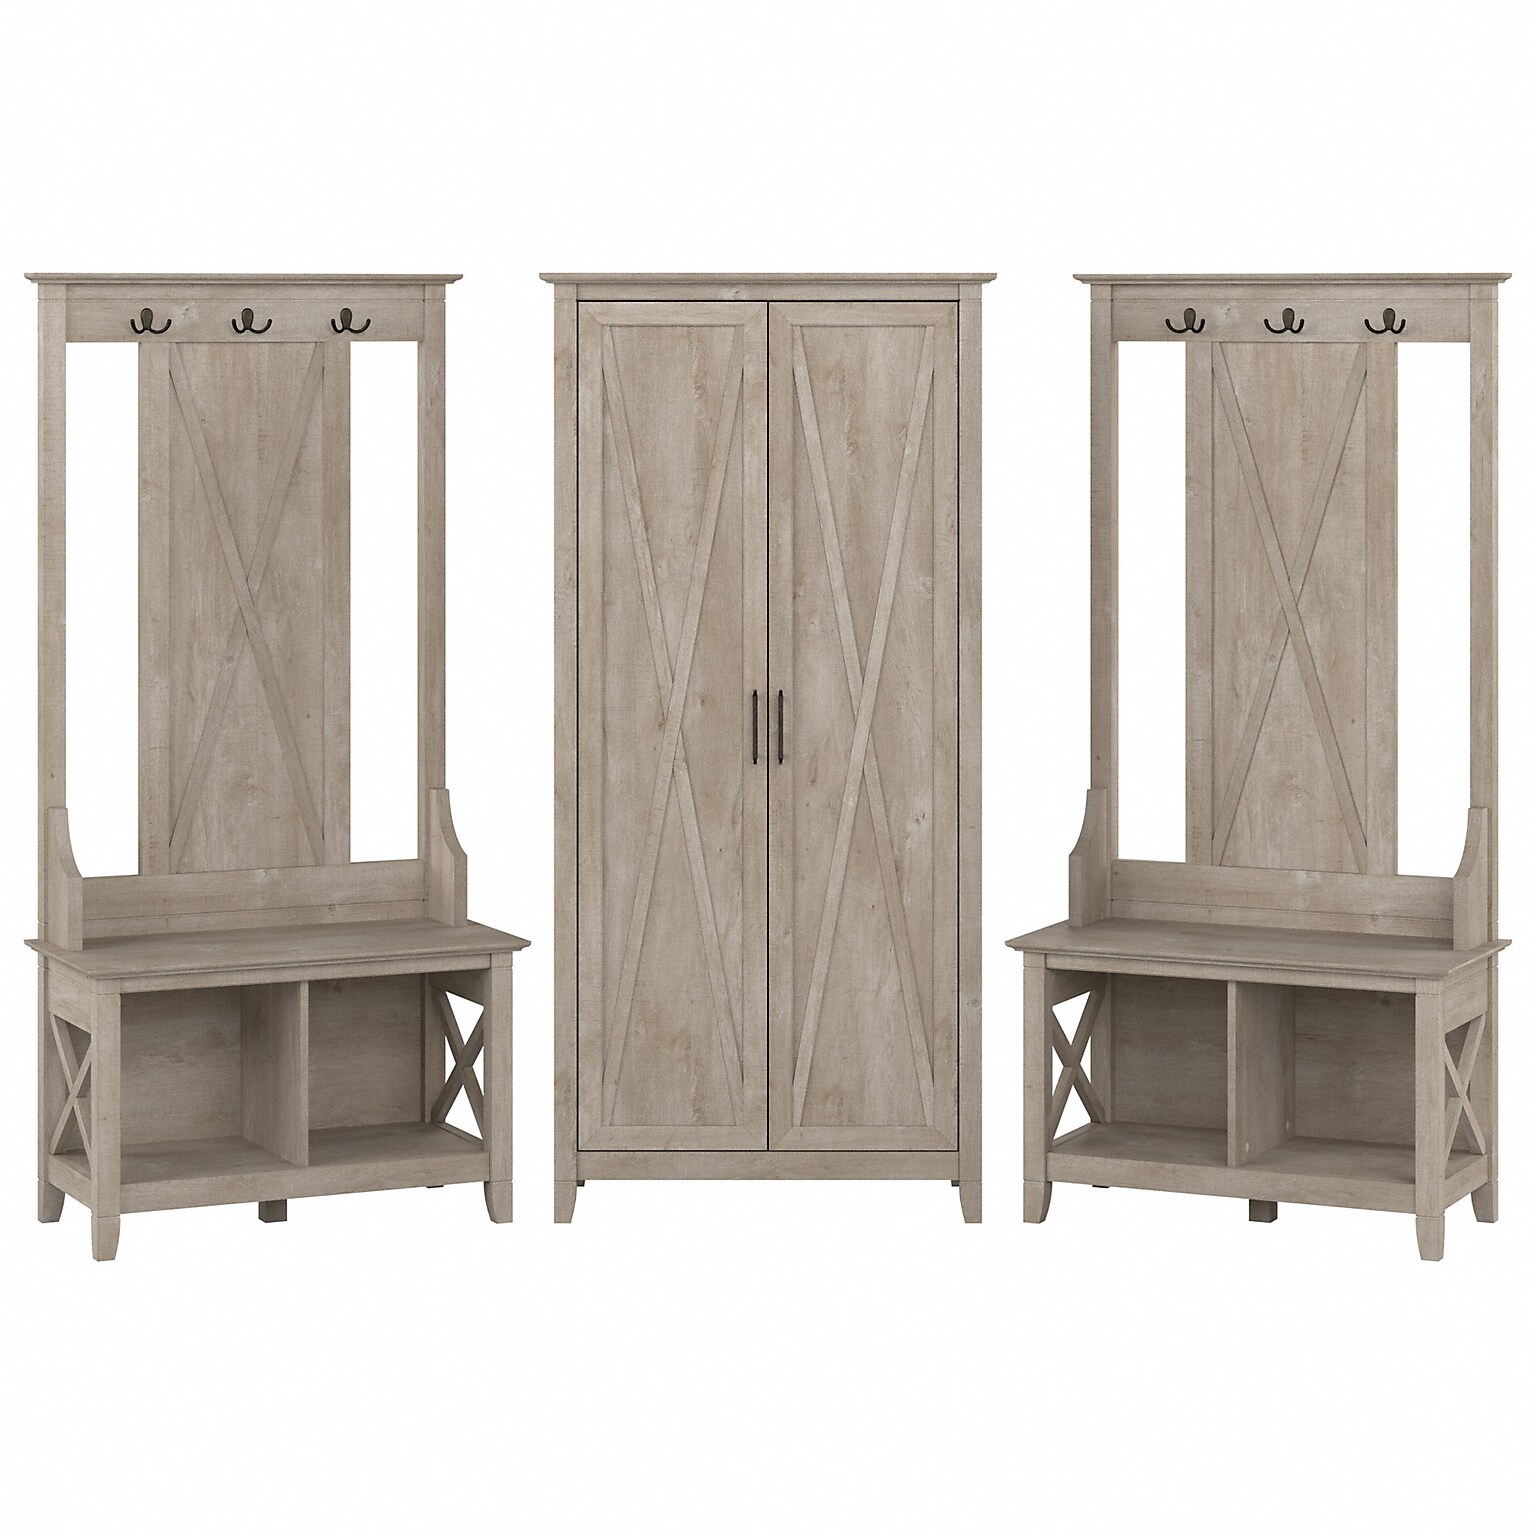 Bush Furniture Key West 66 Entryway Storage Set with Hall Tree, Shoe Bench and Tall Cabinet, Washed Gray (KWS057WG)